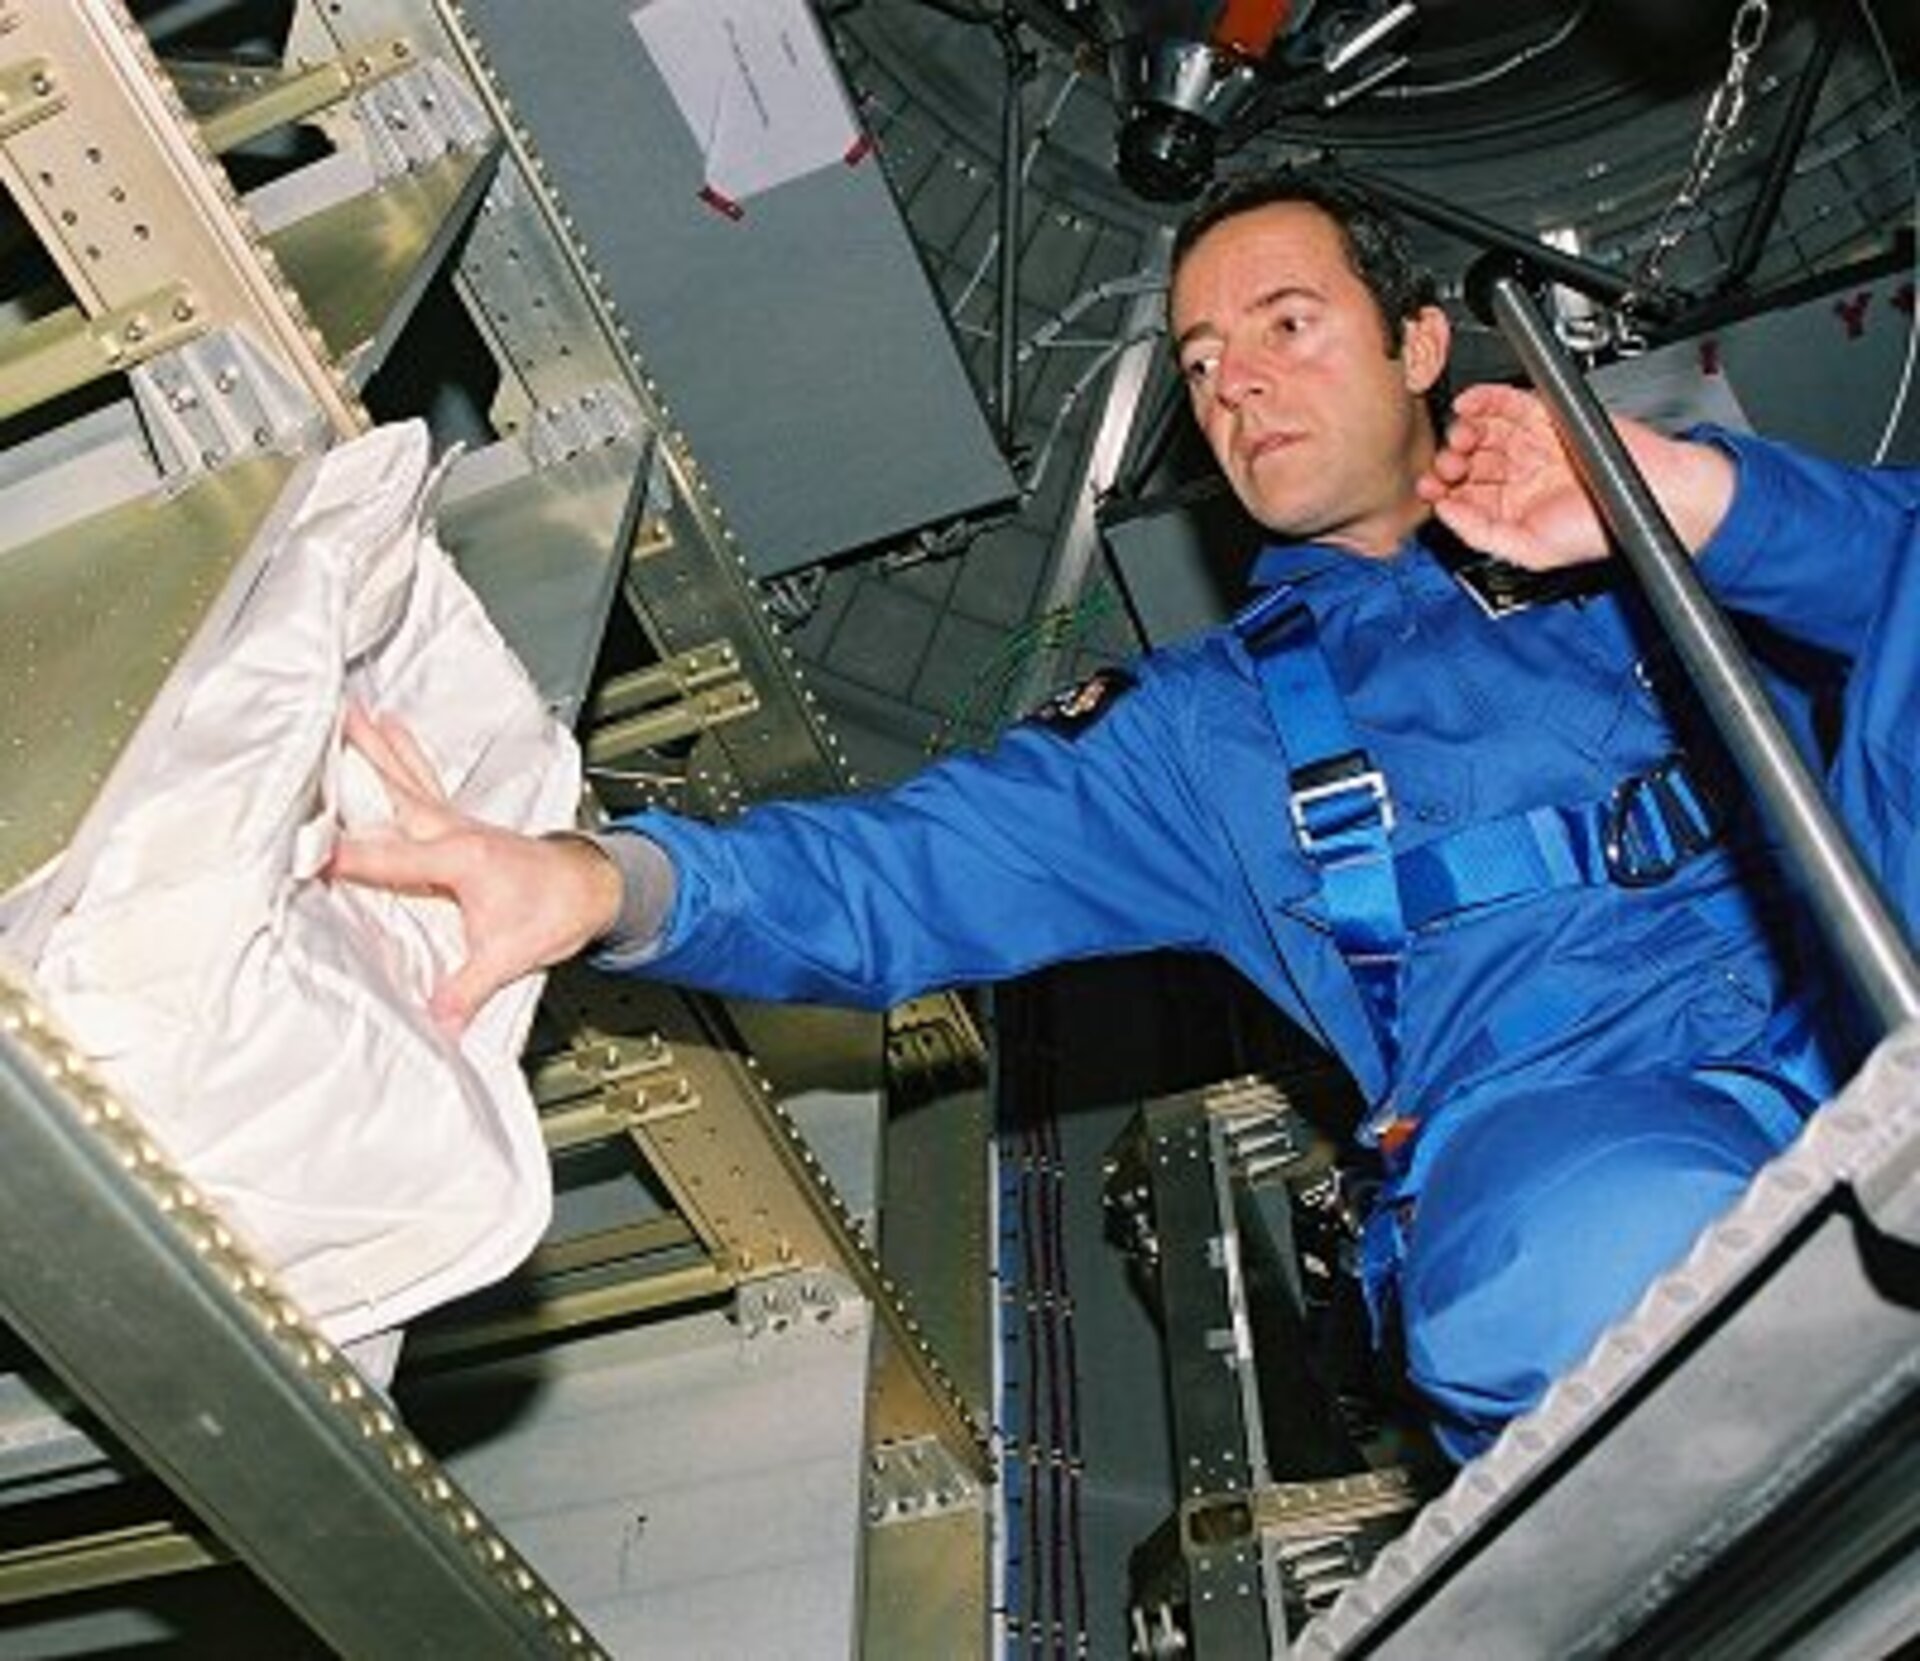 The operator and cargo bags are lowered through the opened docking system hatch